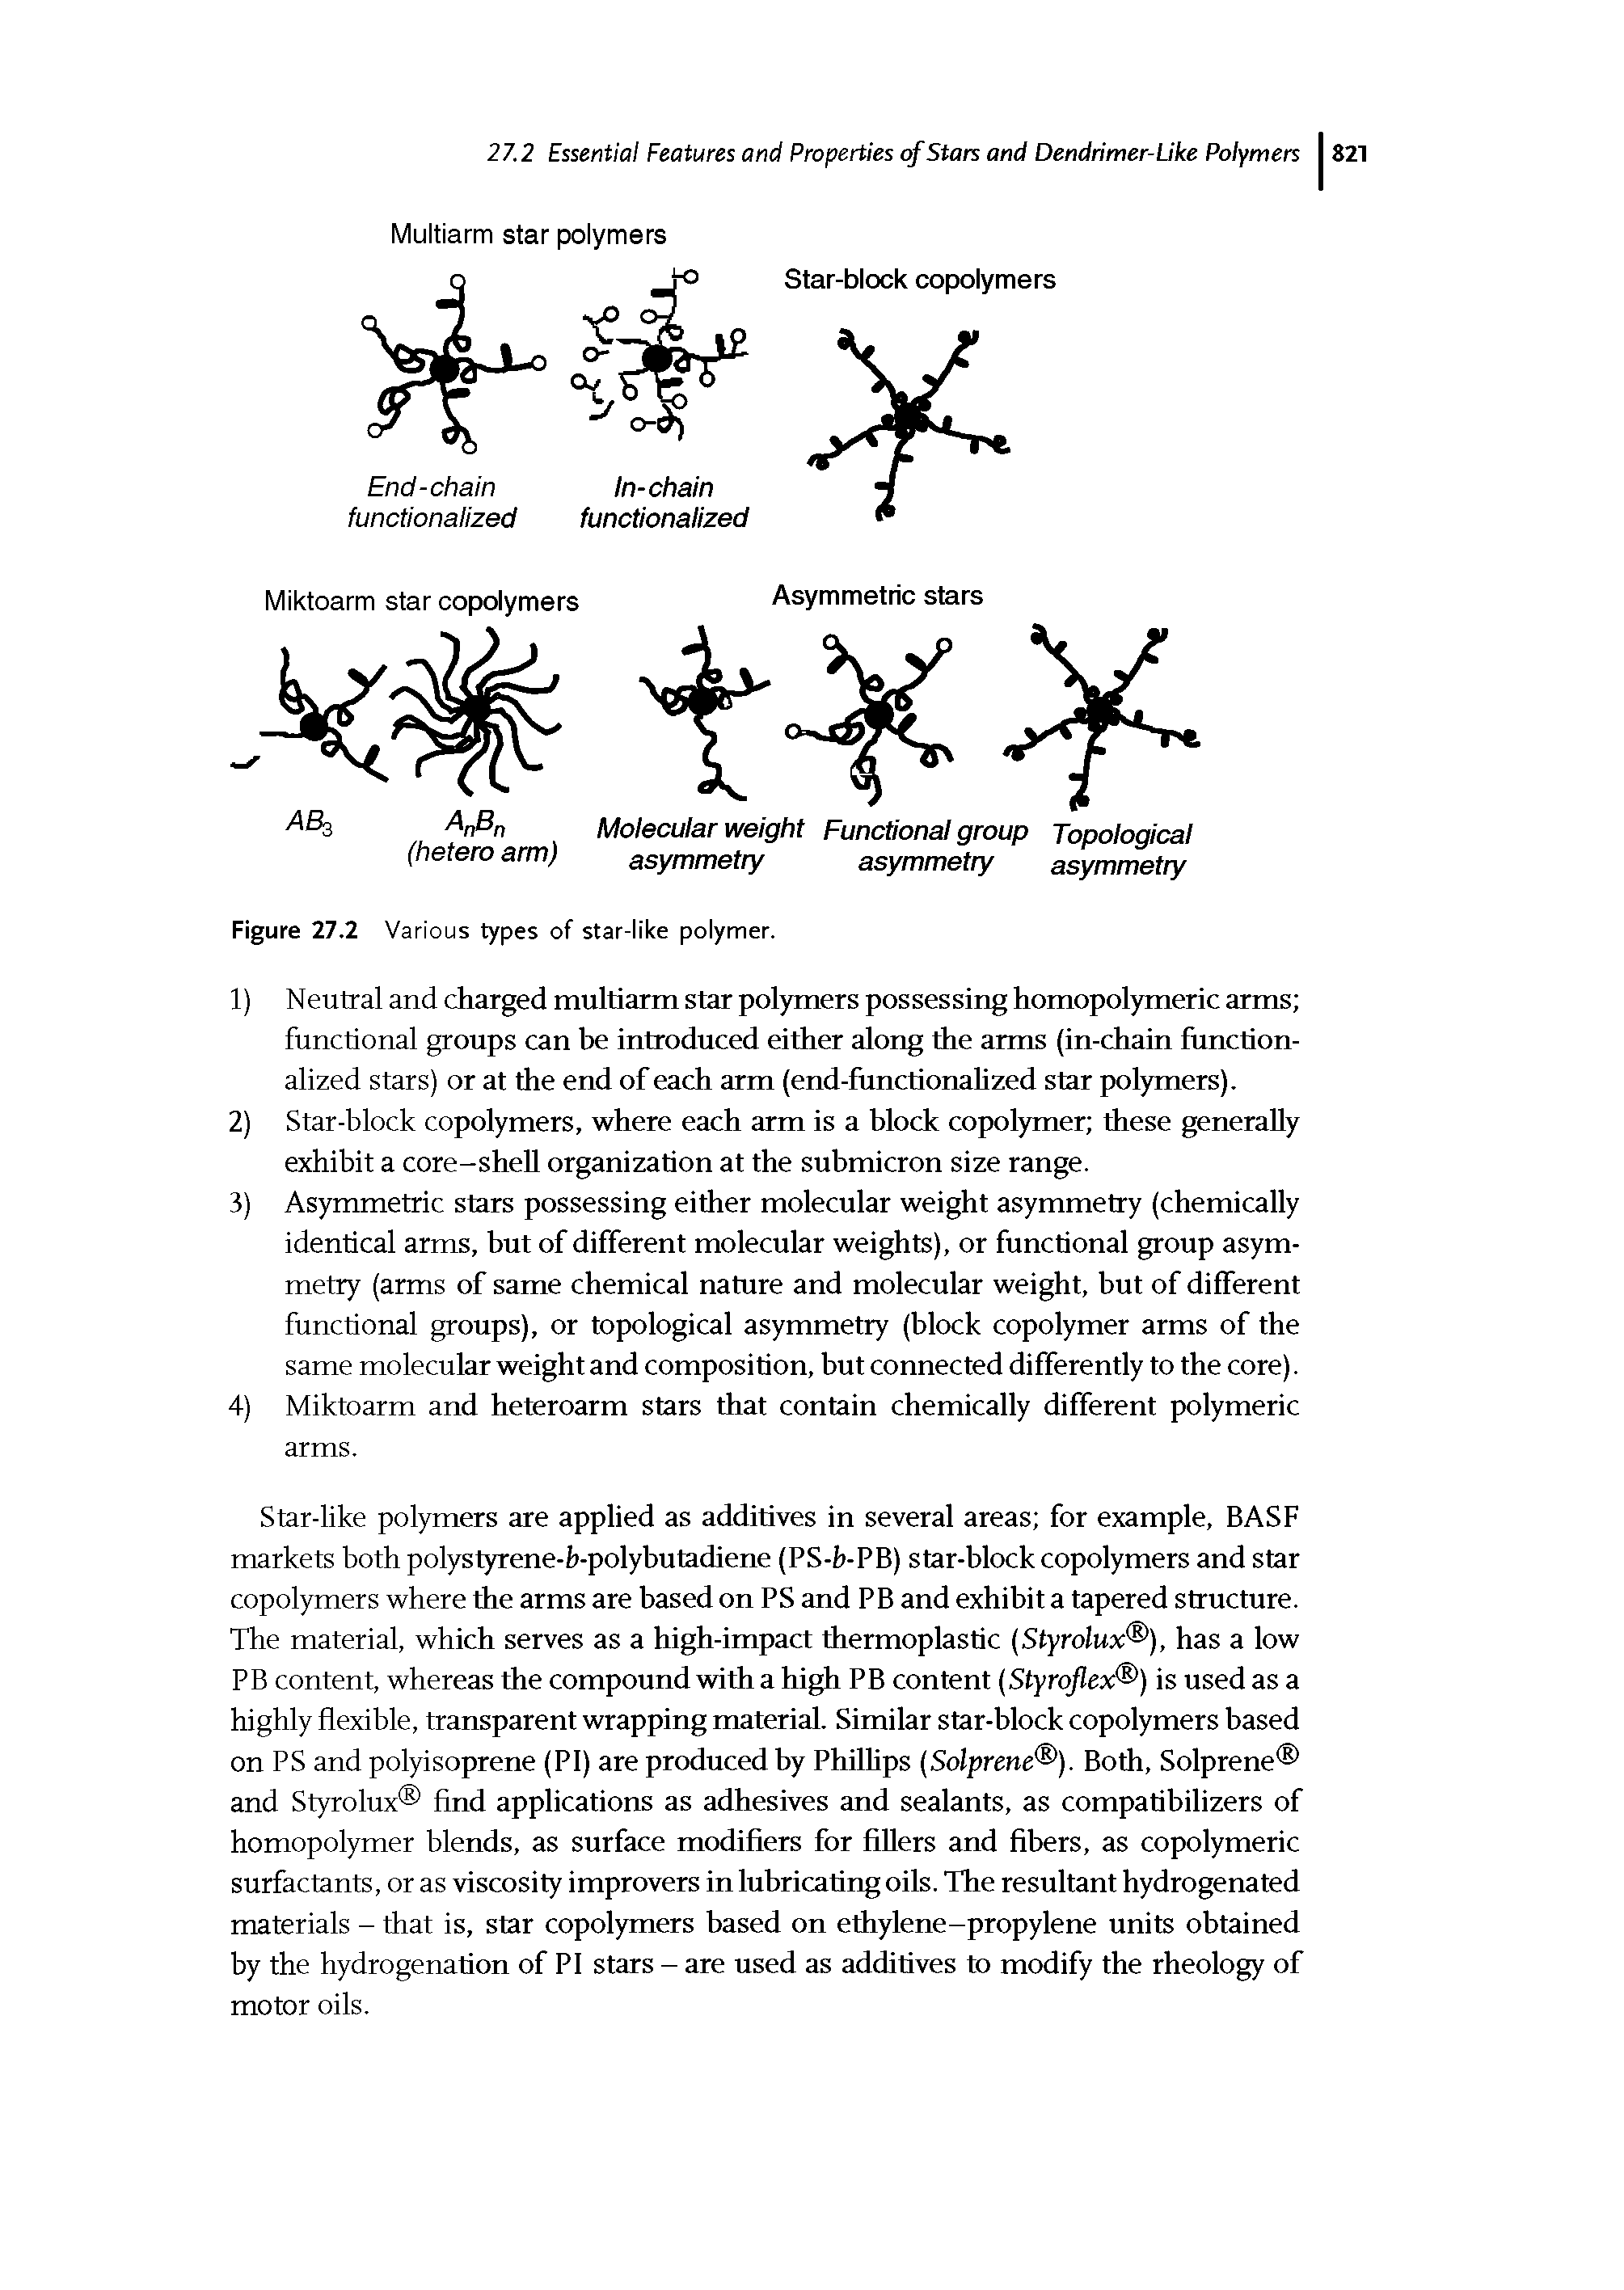 Figure 27.2 Various types of star-like polymer.